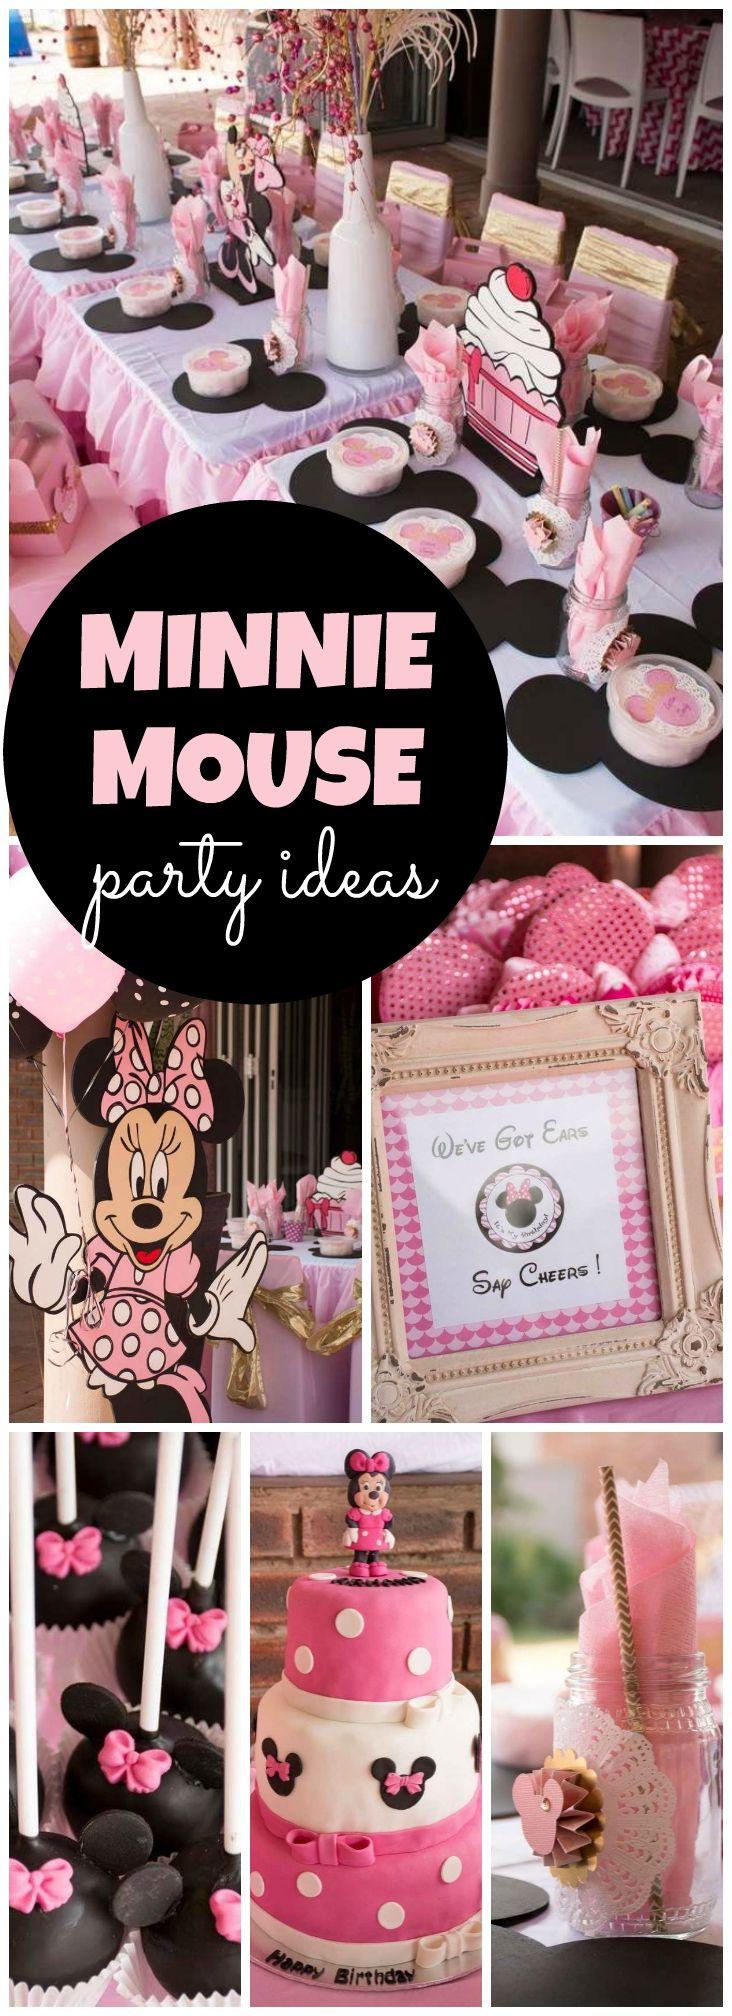 Wedding - Minnie Mouse - Pink And Gold / Birthday "Minnie Mouse Magnificense"